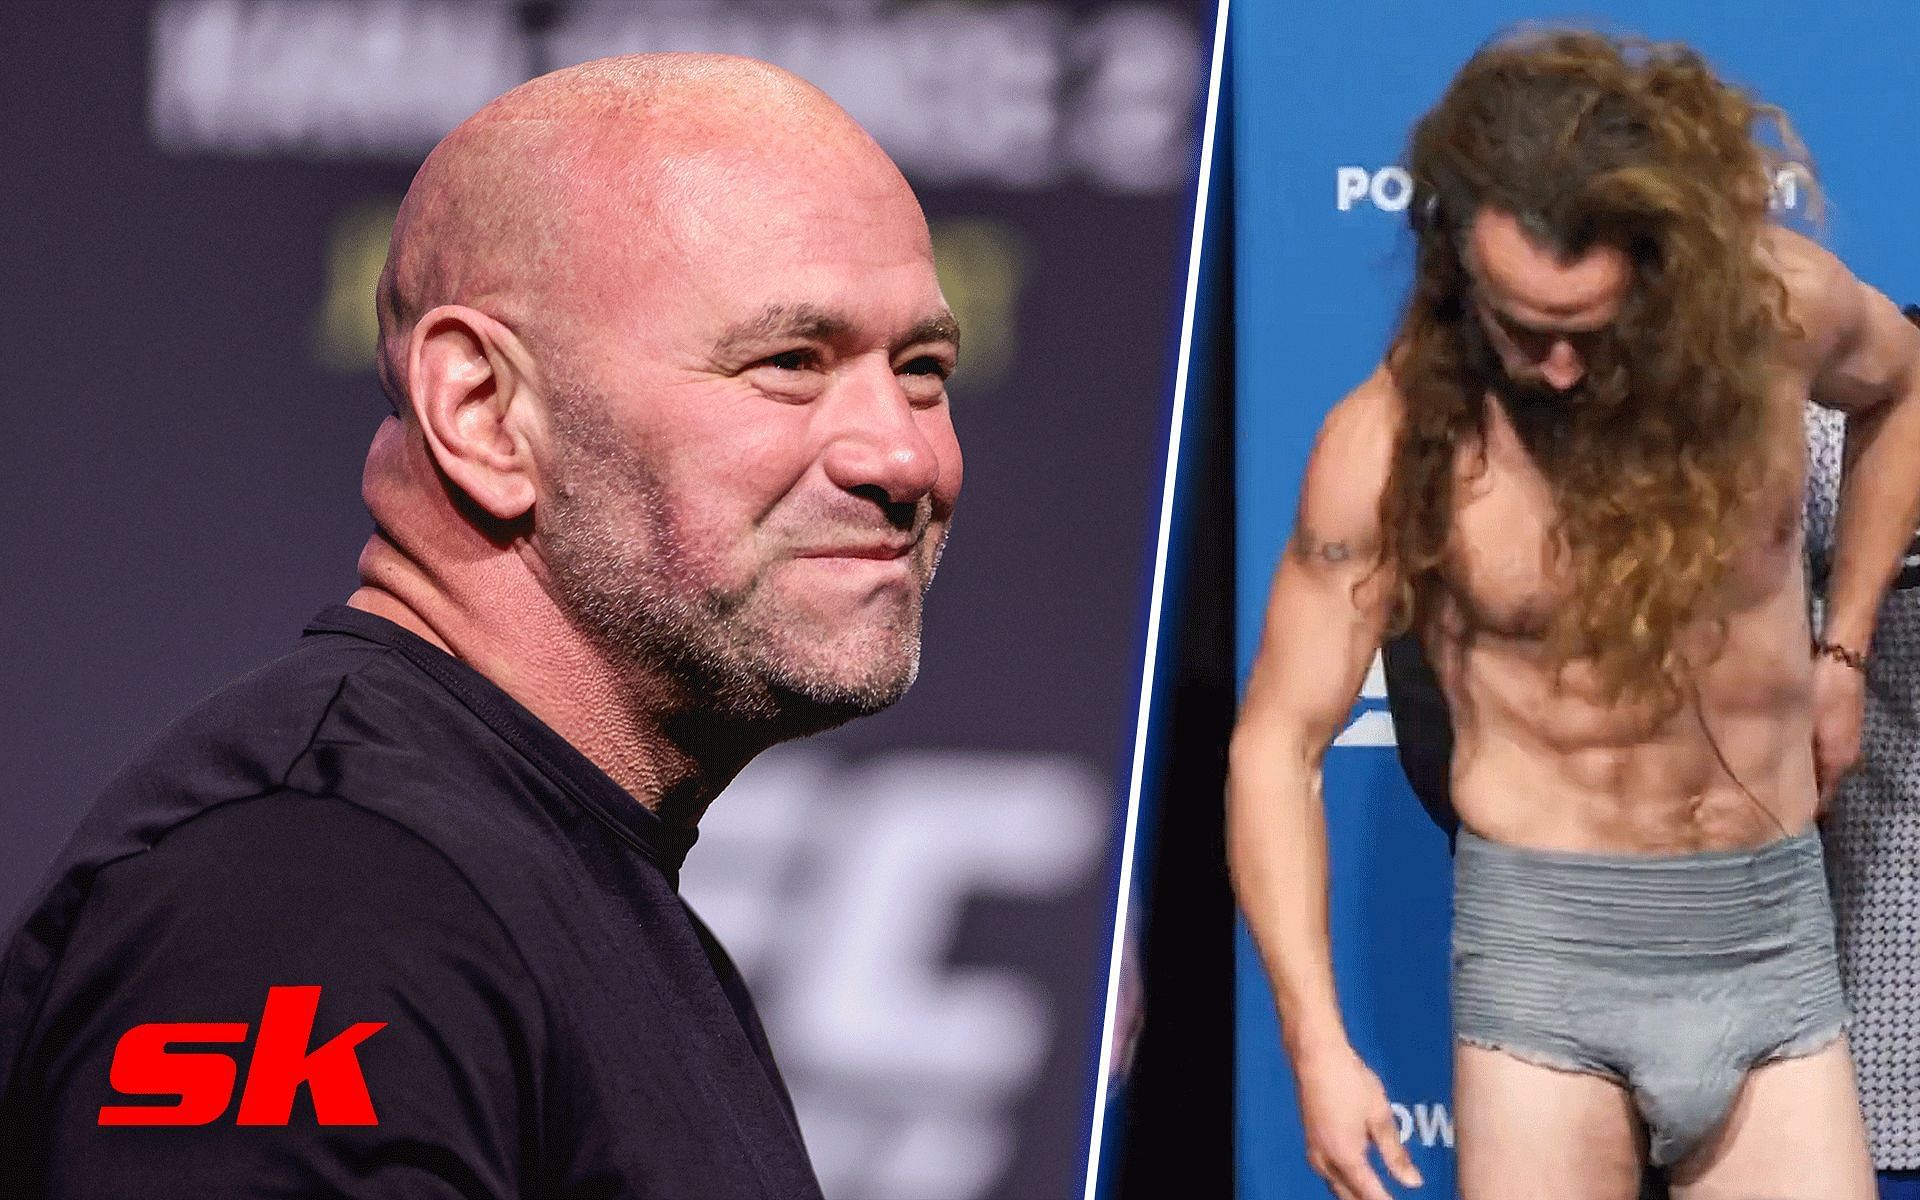 Dana White (left) and Michael Smith (right) [Image credits: Getty Images and @powerslapleague on Twitter]